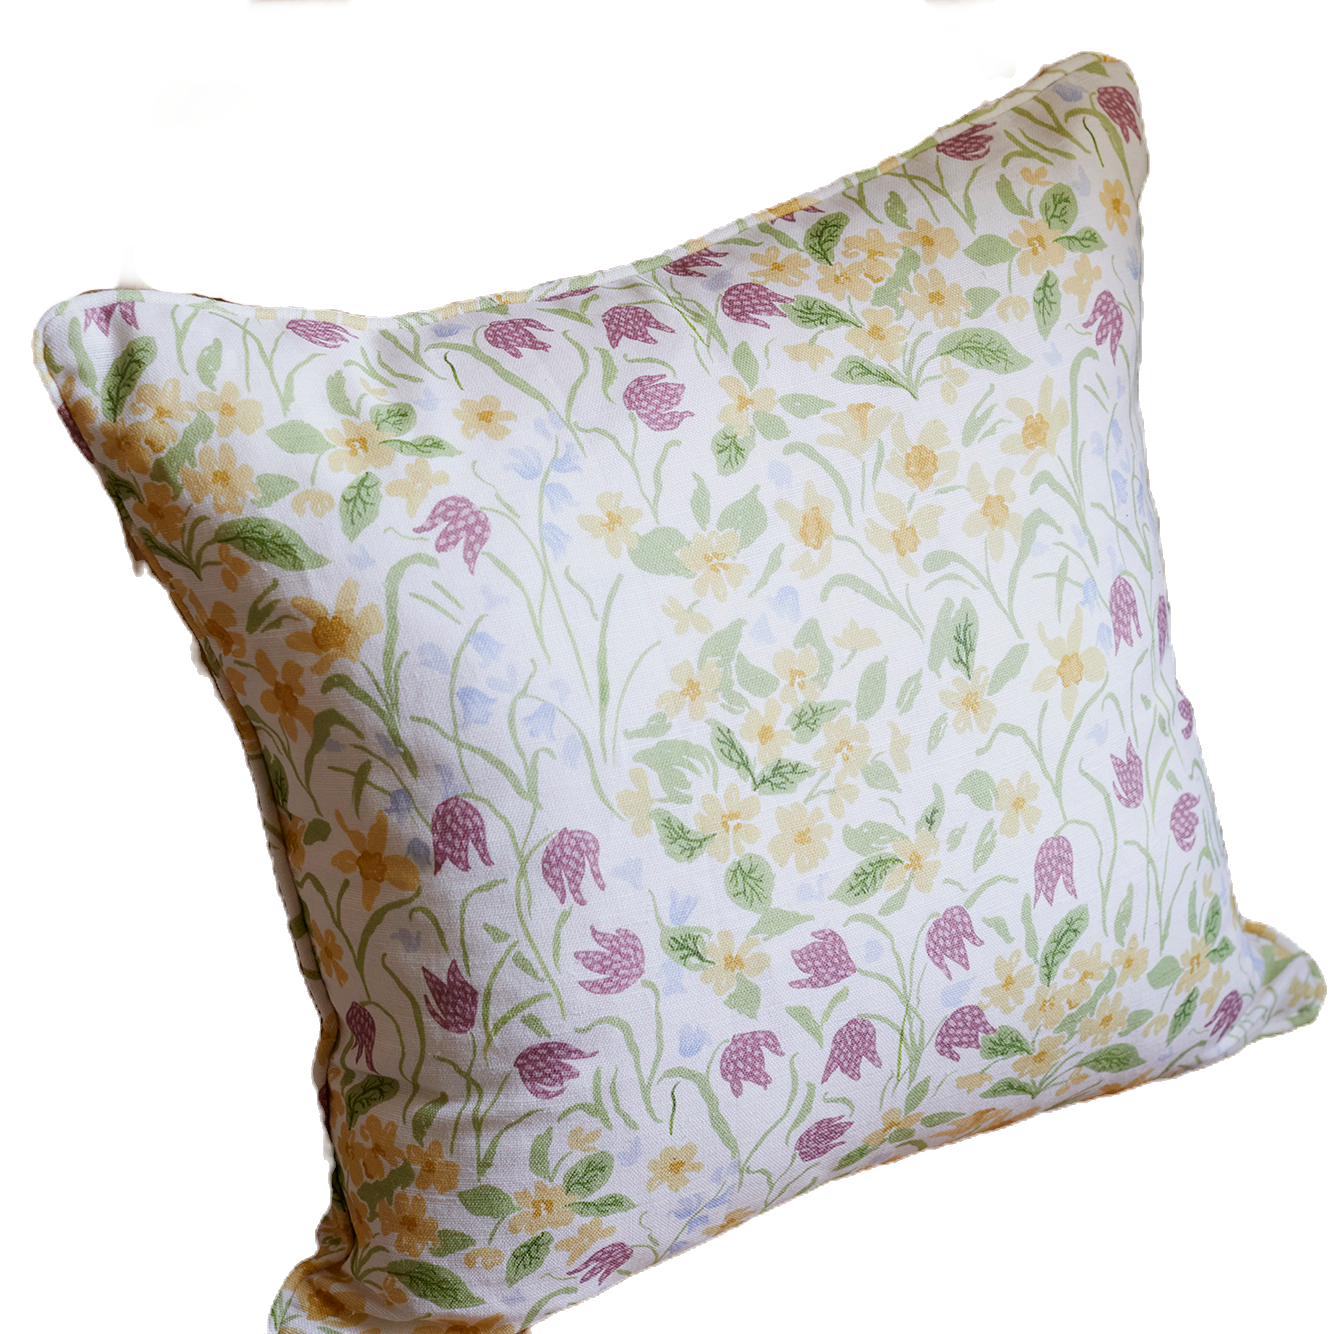 Sophie Harpley, ' Oxford Meadow' linen piped cushion'